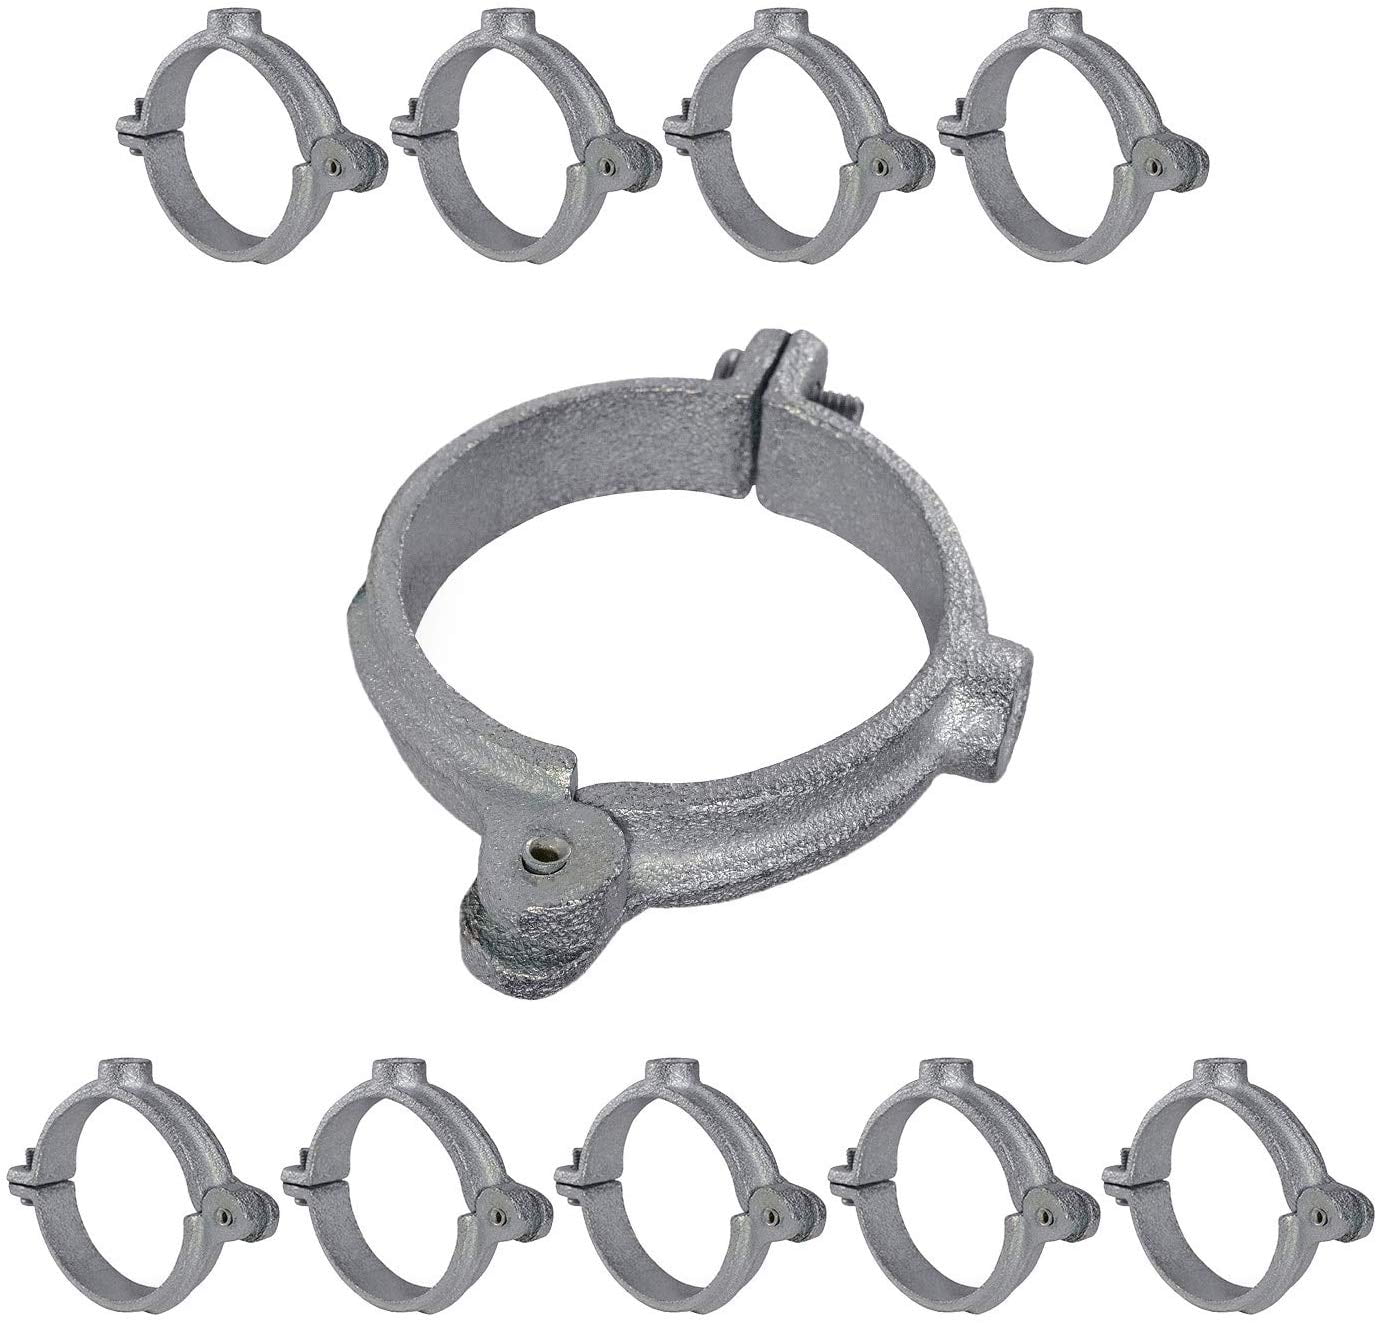 Highcraft Hinged Split Ring Pipe Hanger 3 4 in Galvanized Iron Extension Hanger with 3 8 in Threaded Rod Fitting for Suspending Tubing 10 Pack 723a3647 ca89 48b5 a62a f9f3e81b79ce 1.04a9023aa9238c8c09ed1a6c0a2f71e9